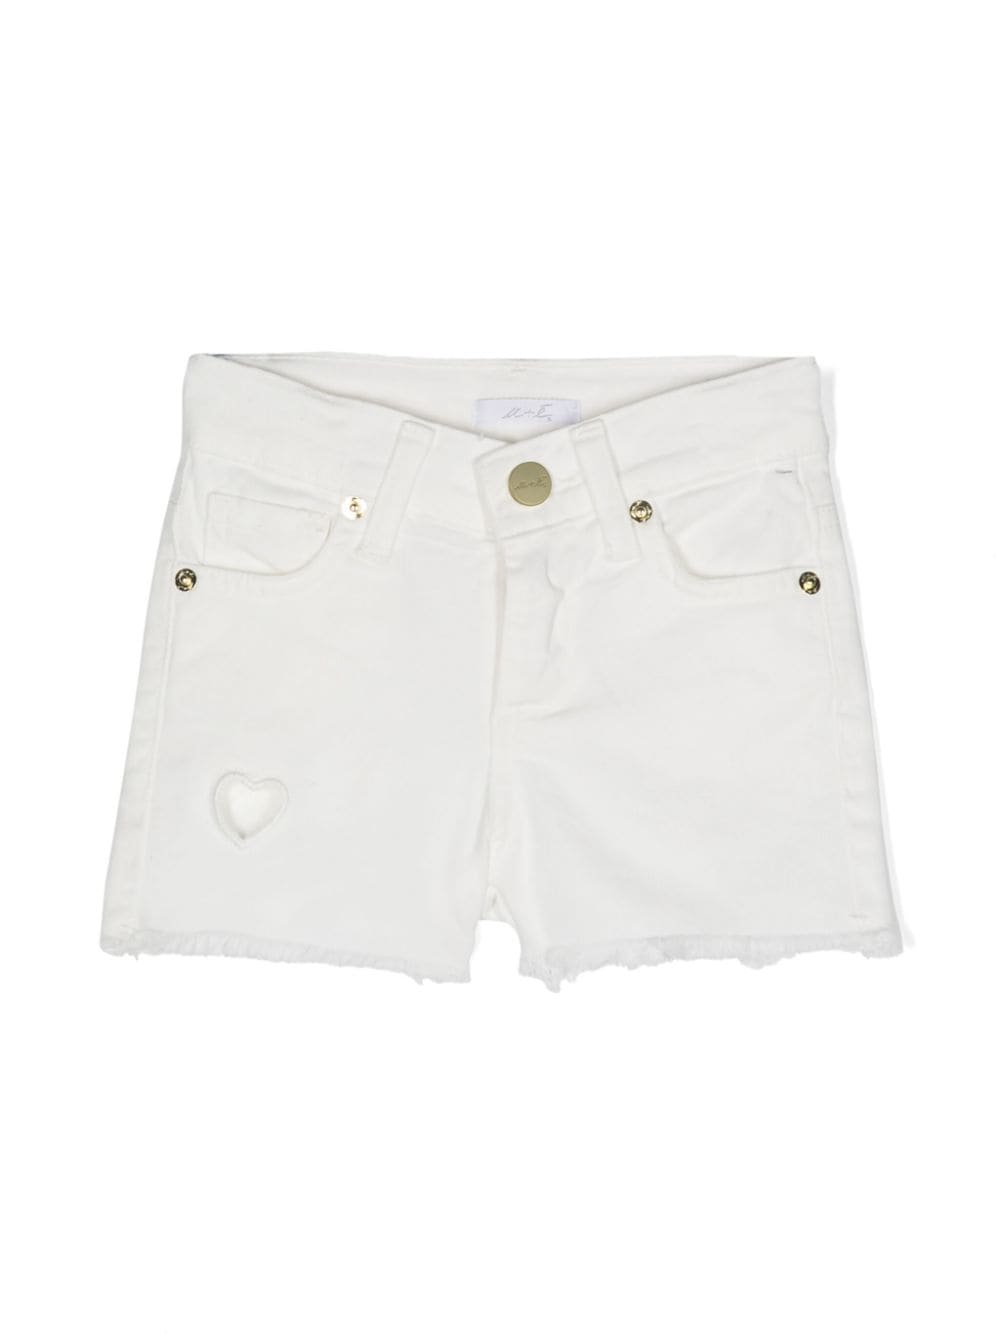 Miss Grant Kids cut-out fringed shorts - White von Miss Grant Kids